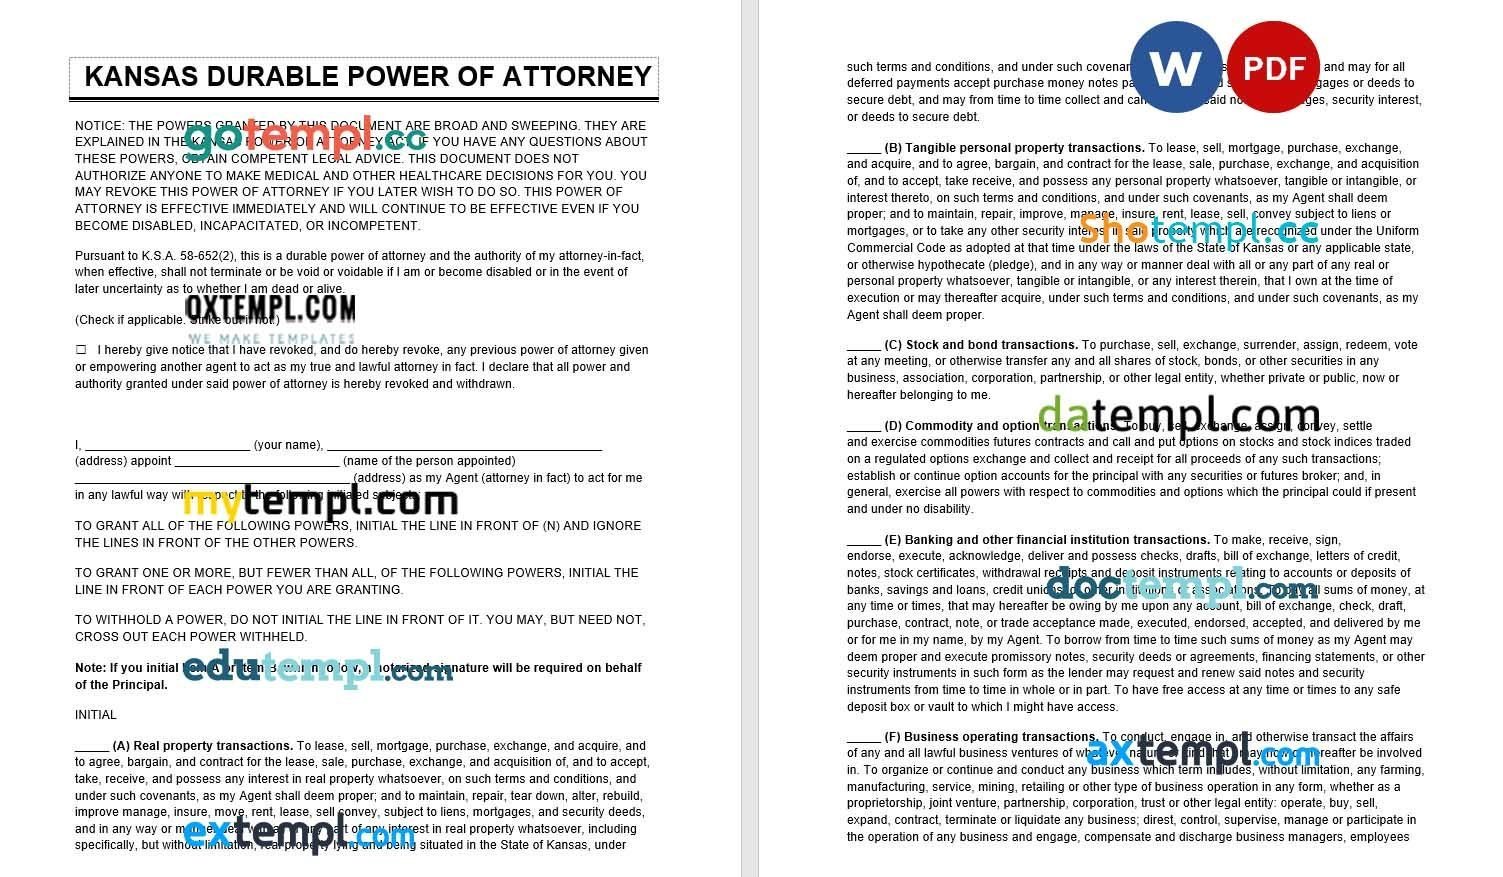 Kansas Durable Power of Attorney example, fully editable